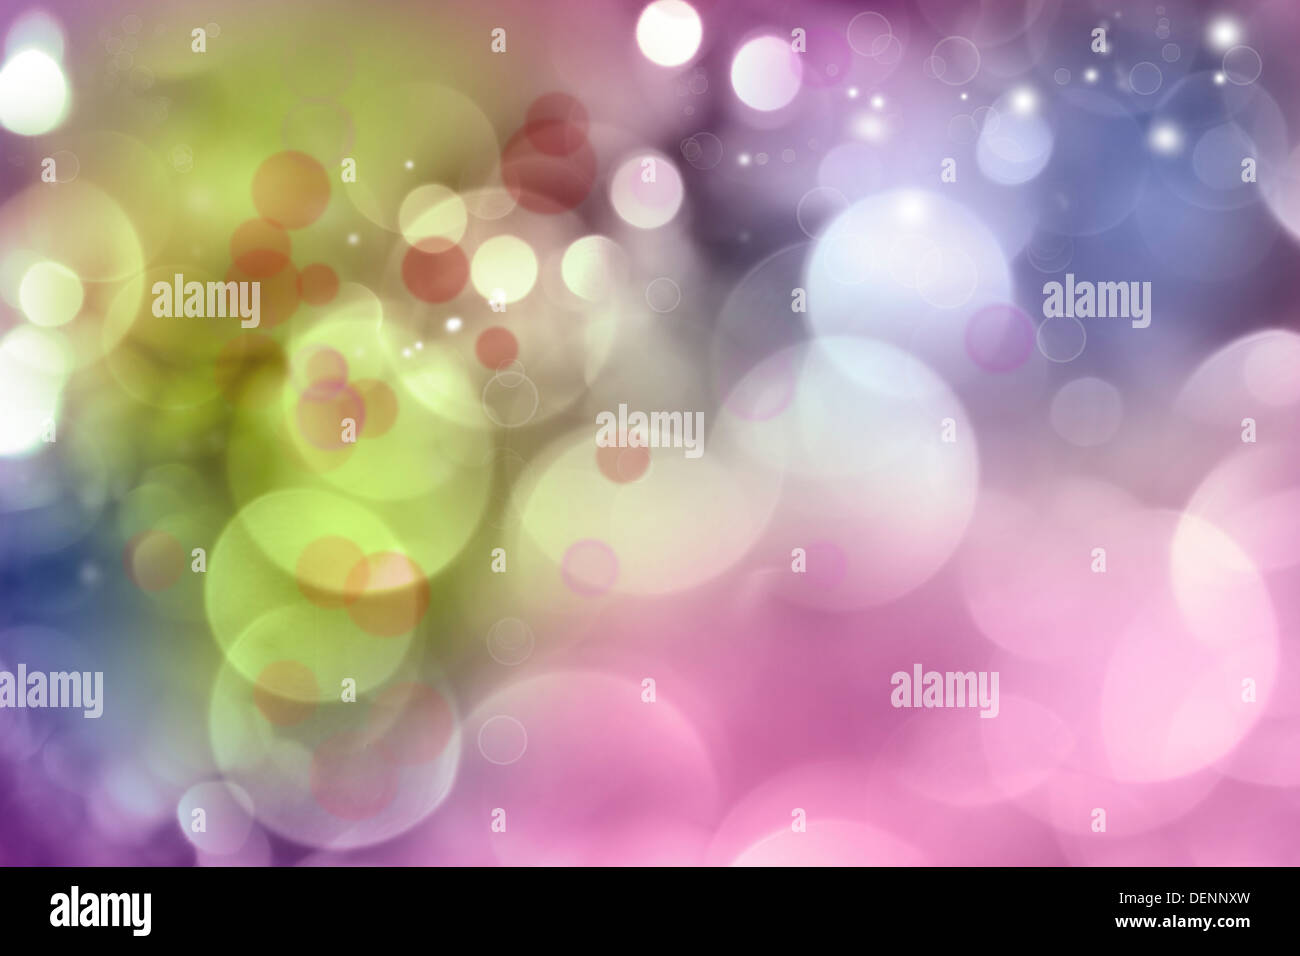 Bright circles of light abstract colorful background Stock Photo